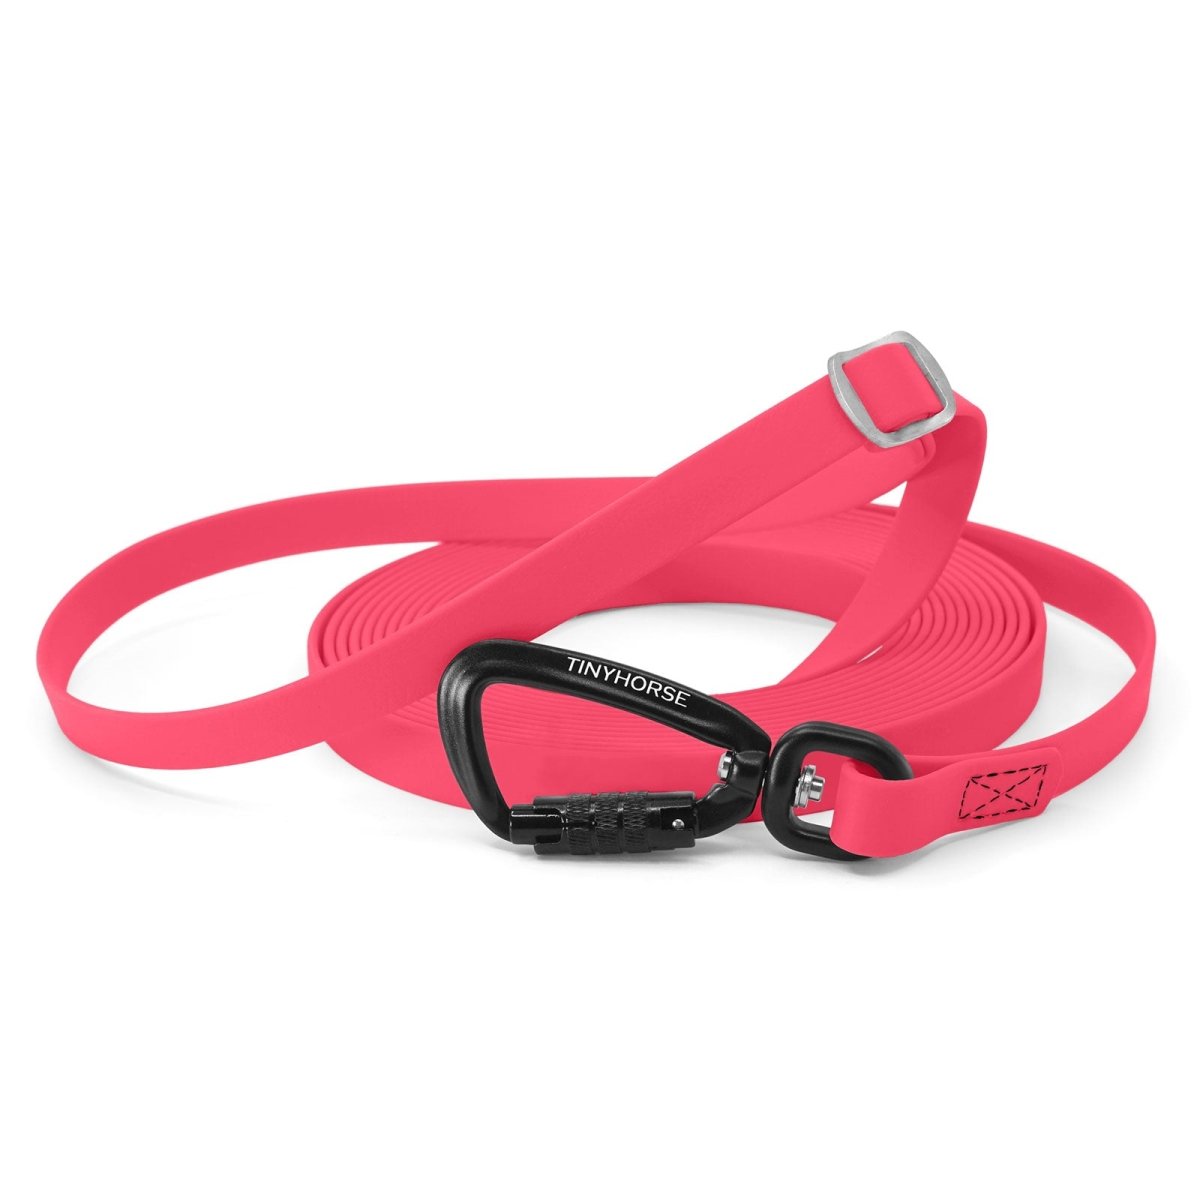 An adjustable neon pink-coloured Trainer made of BioThane and an auto-locking carabiner